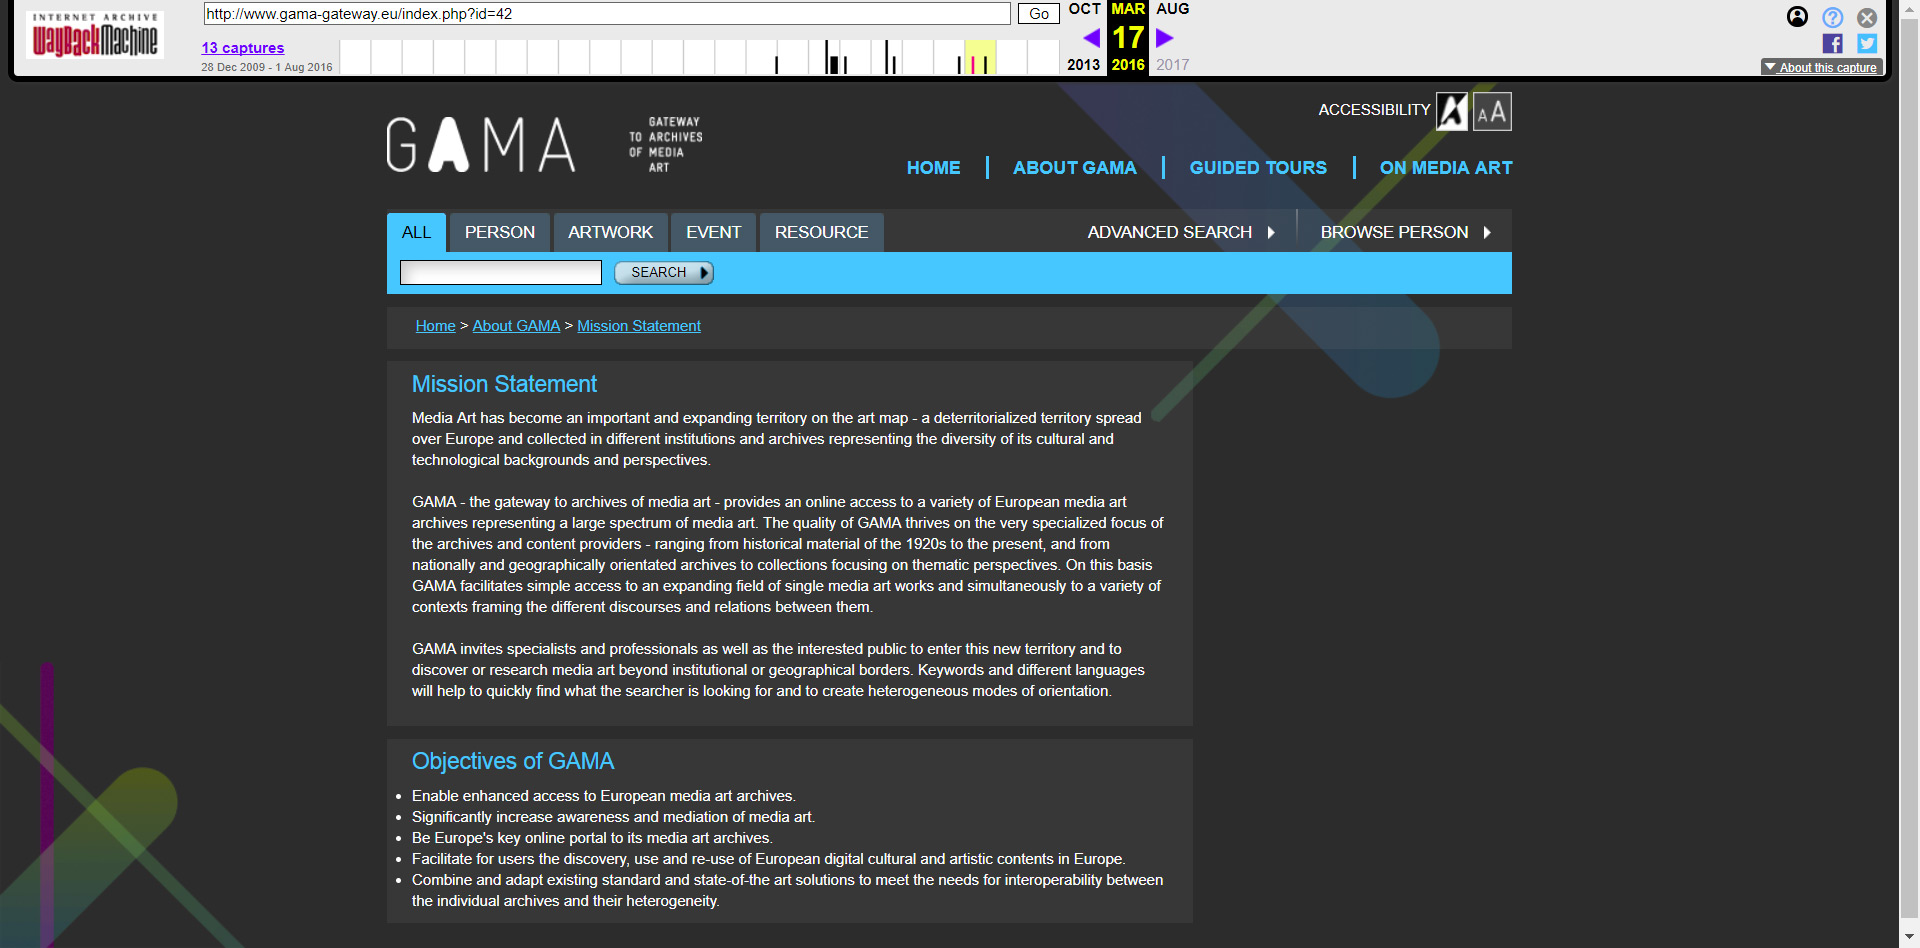 Screenshot of the GAMA portal interface provided by Internet Archive's Wayback Machine.